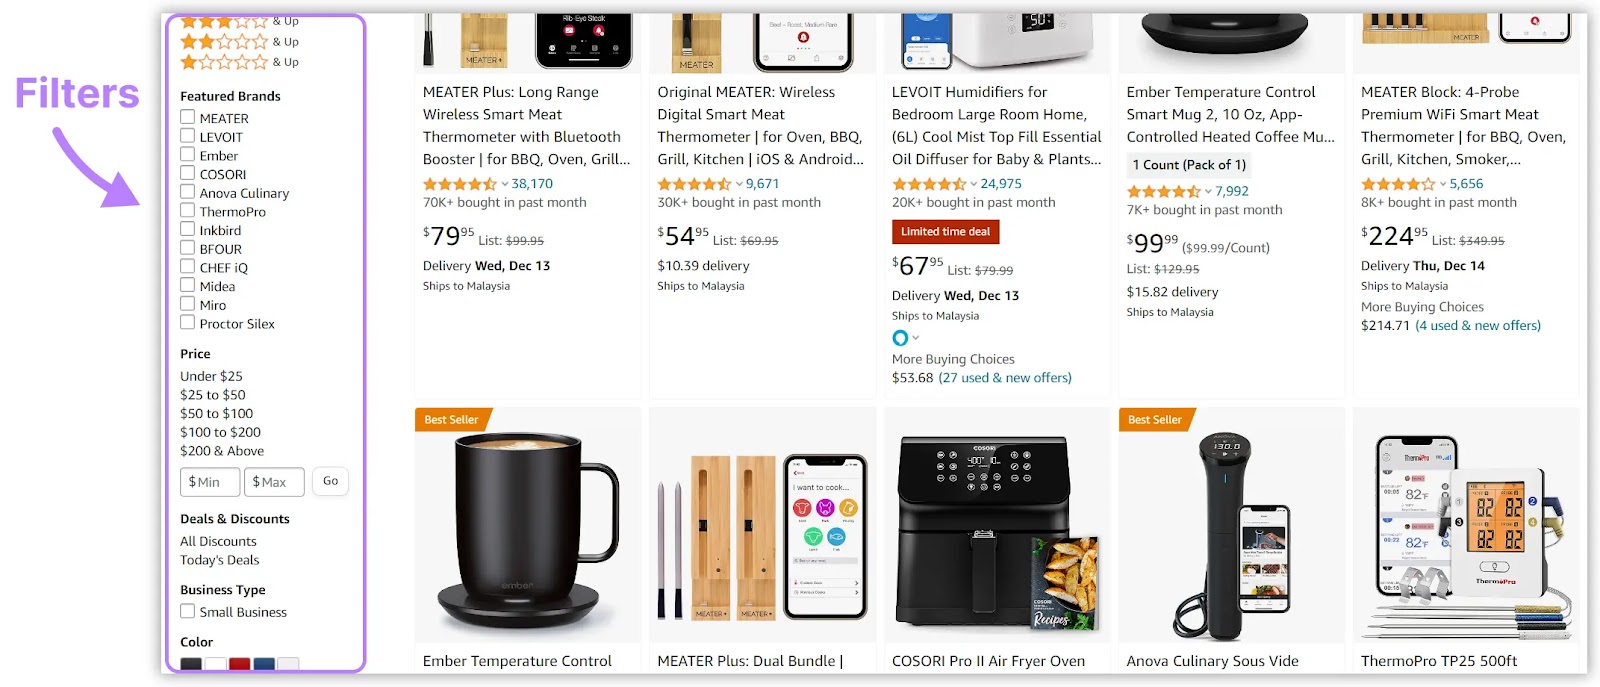 Filters on SEO ecommerce category page